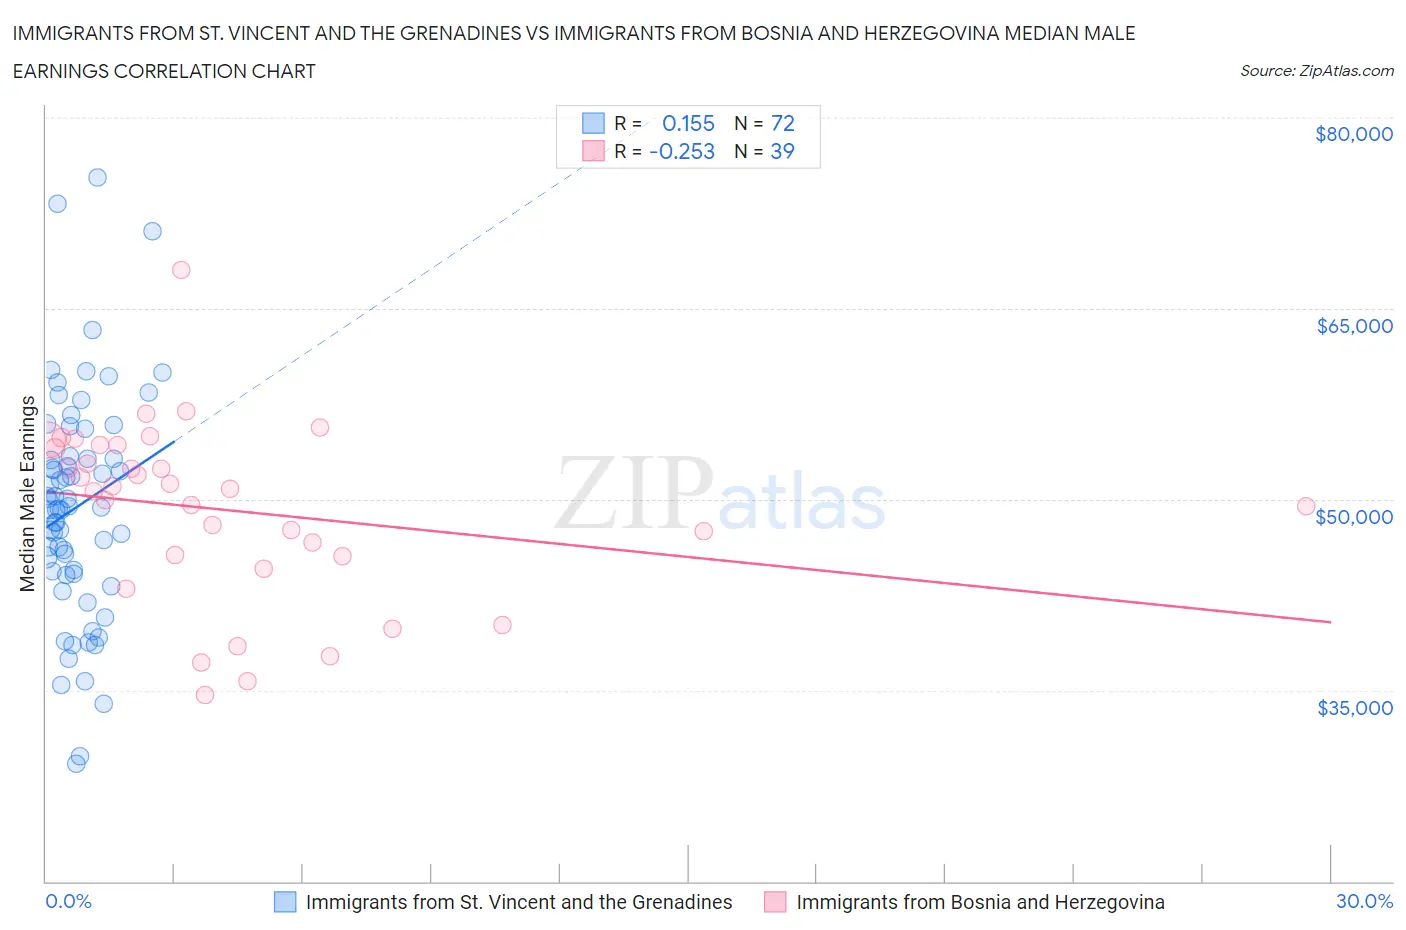 Immigrants from St. Vincent and the Grenadines vs Immigrants from Bosnia and Herzegovina Median Male Earnings